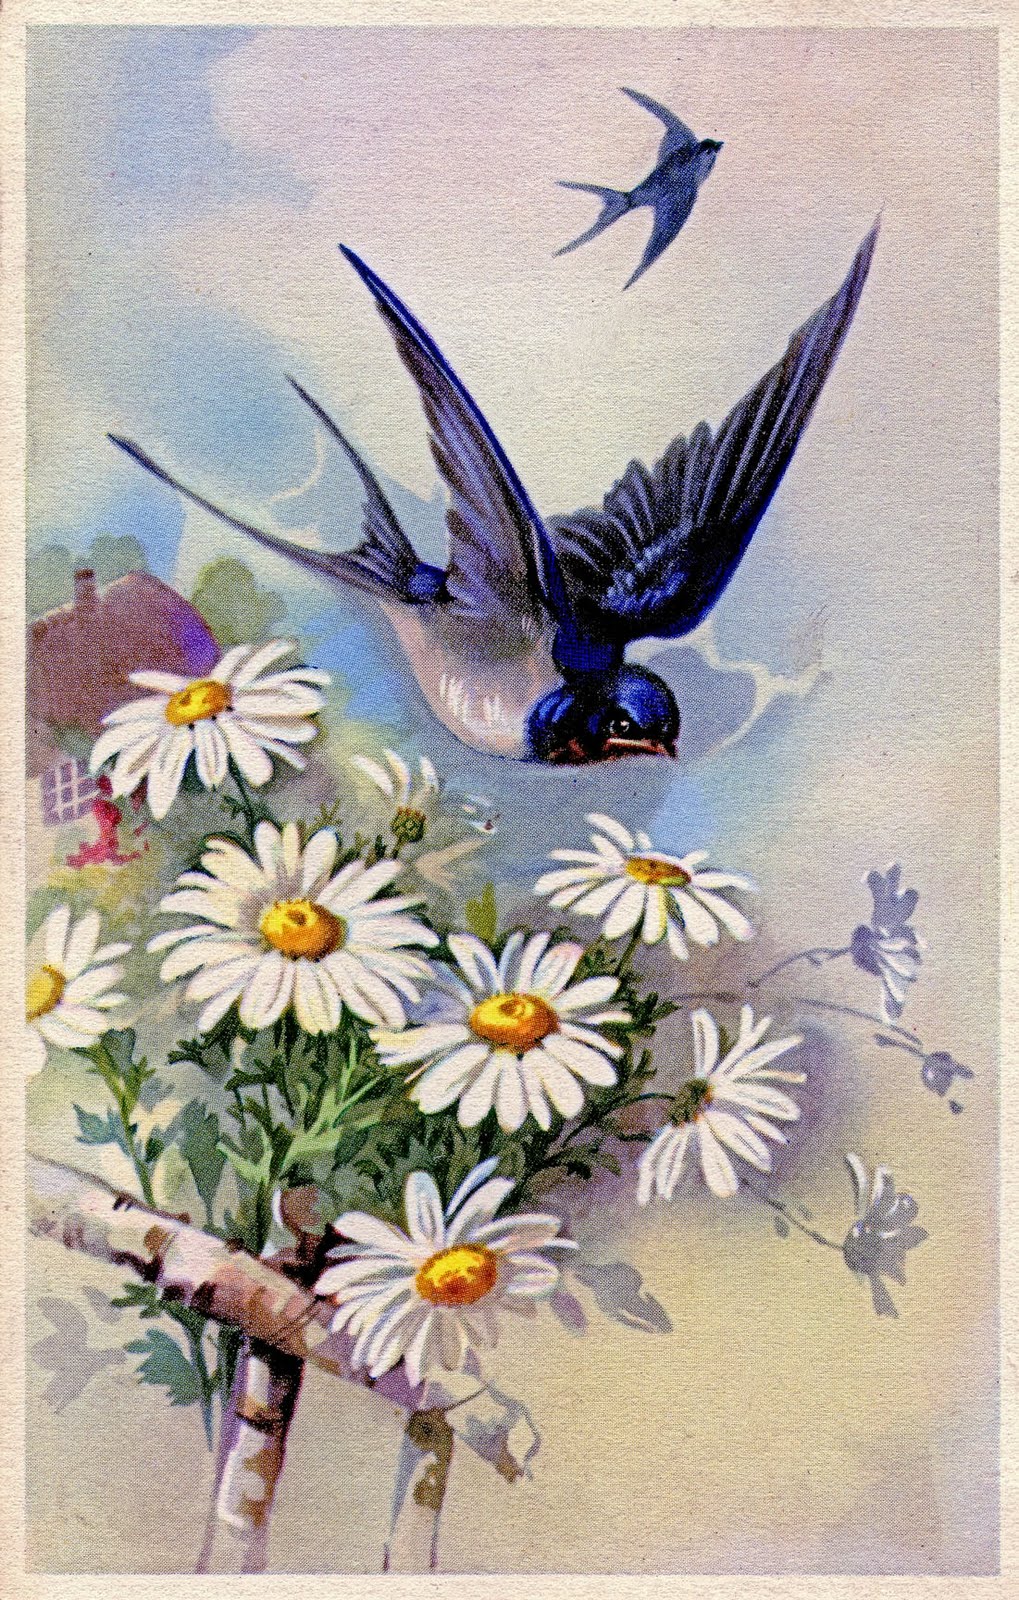 Vintage Clip Art   Swallow With Daisies   The Graphics Fairy